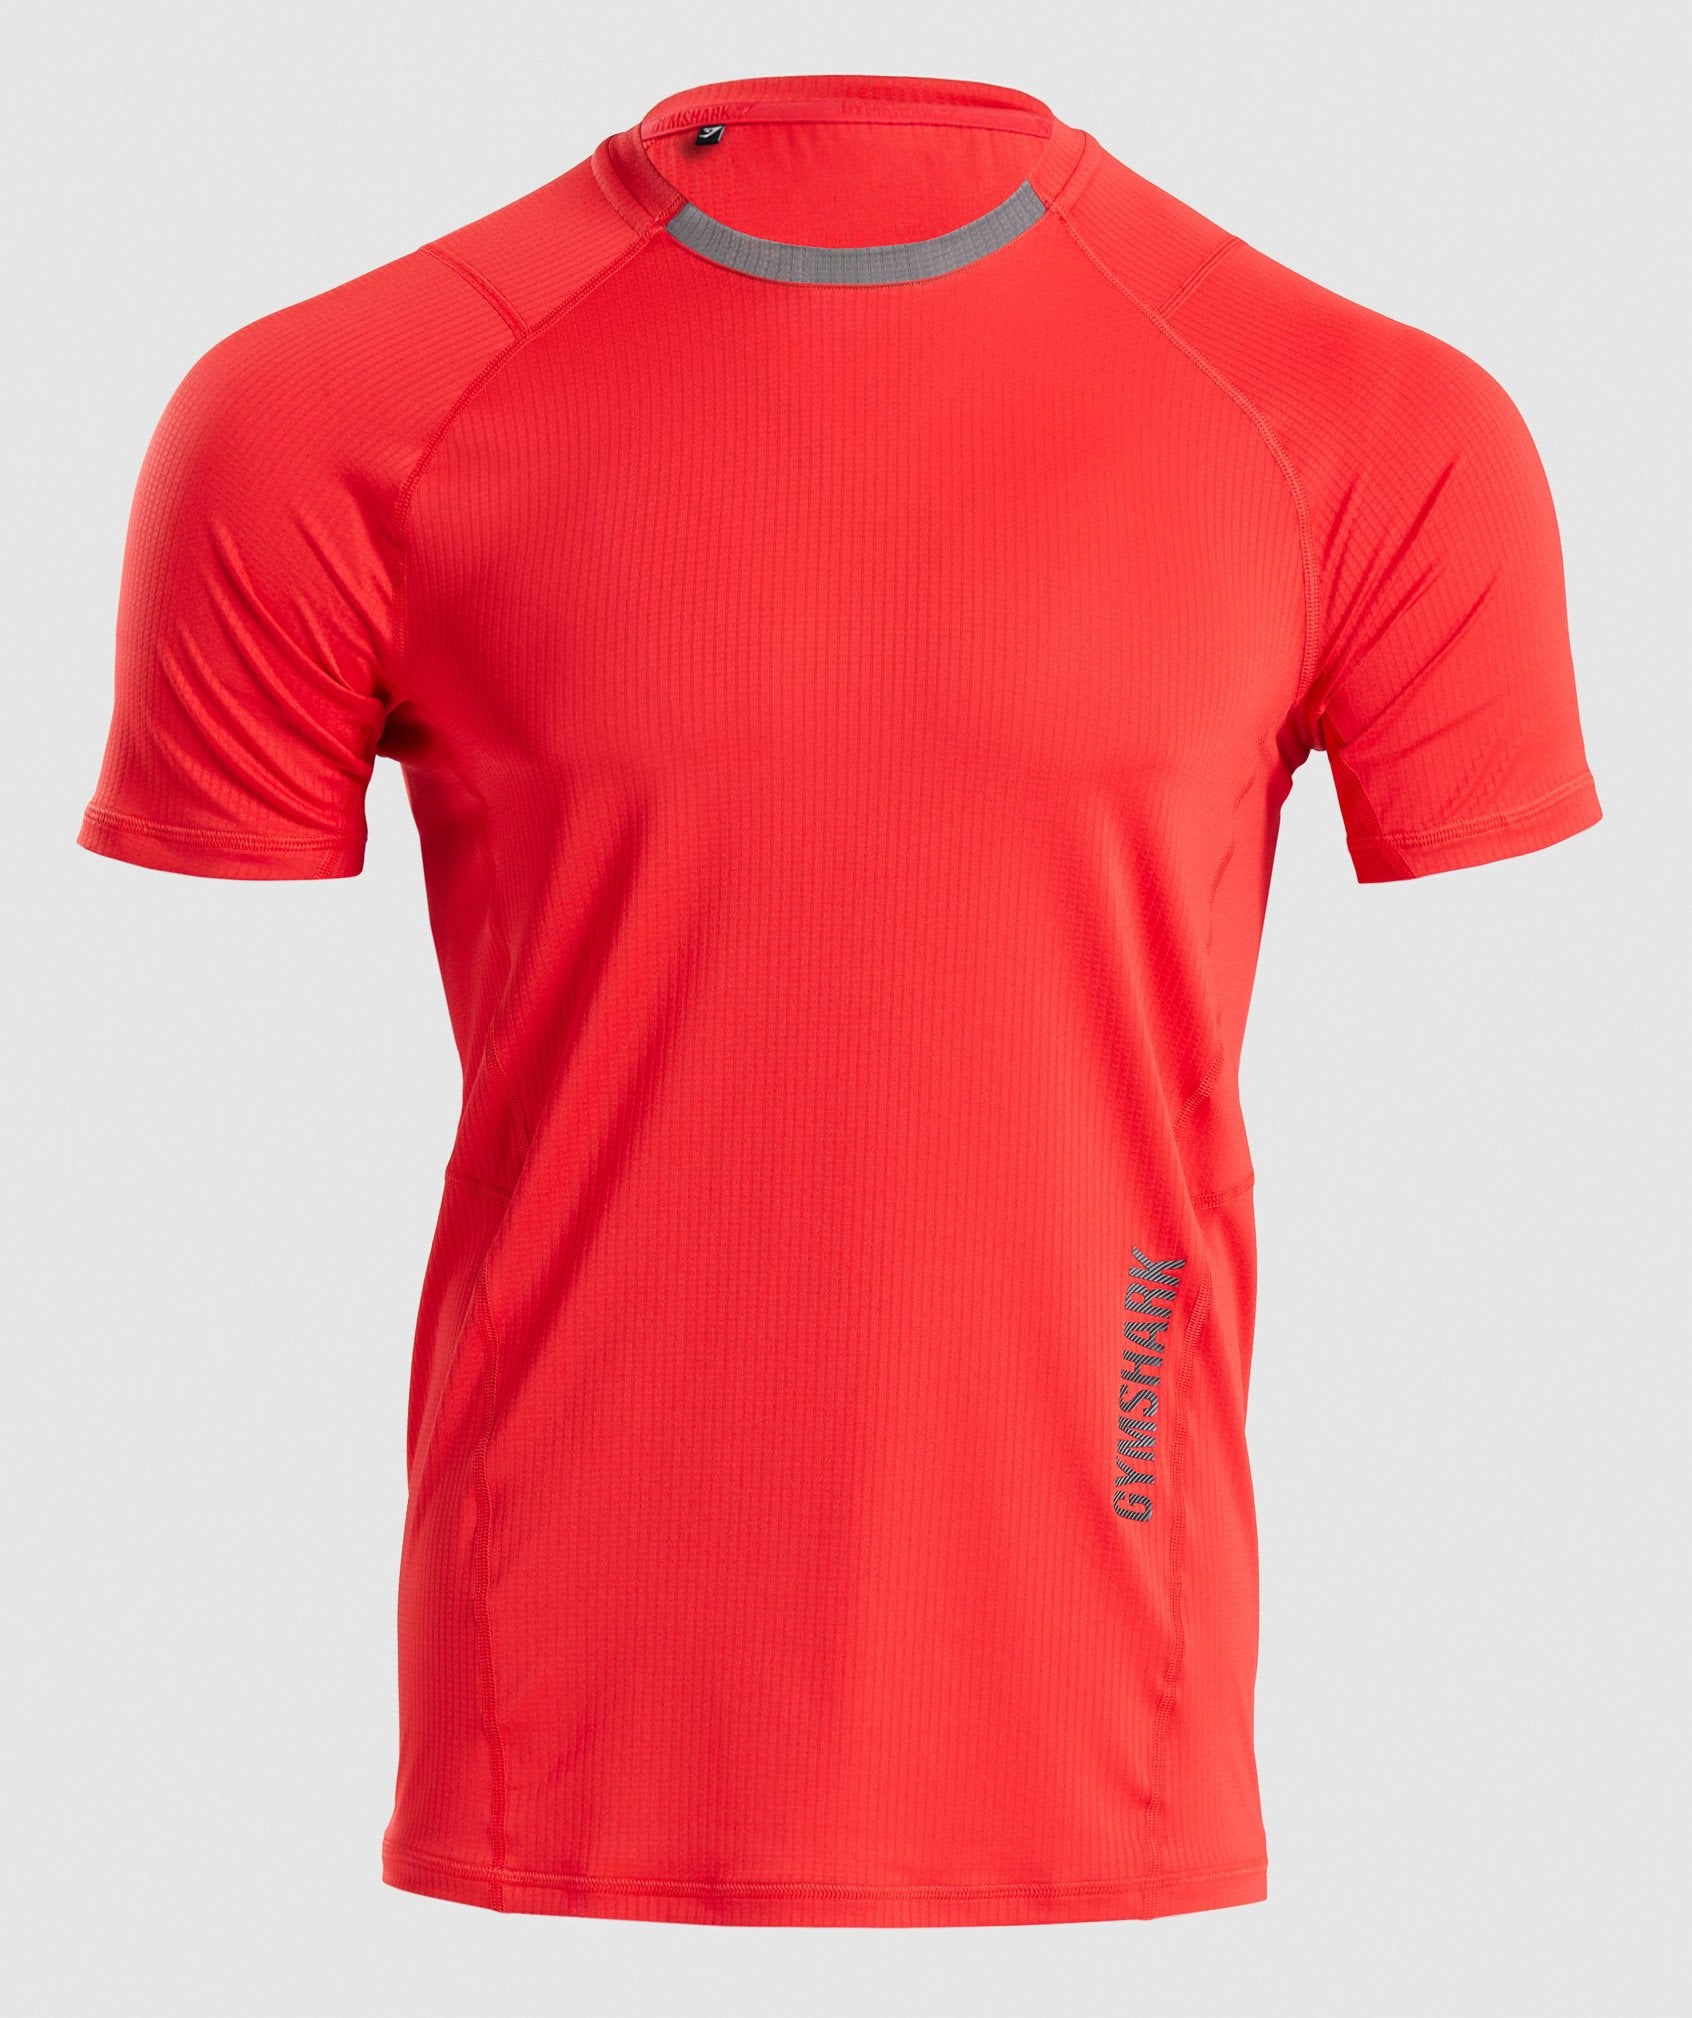 Apex T-Shirt in Red - view 1